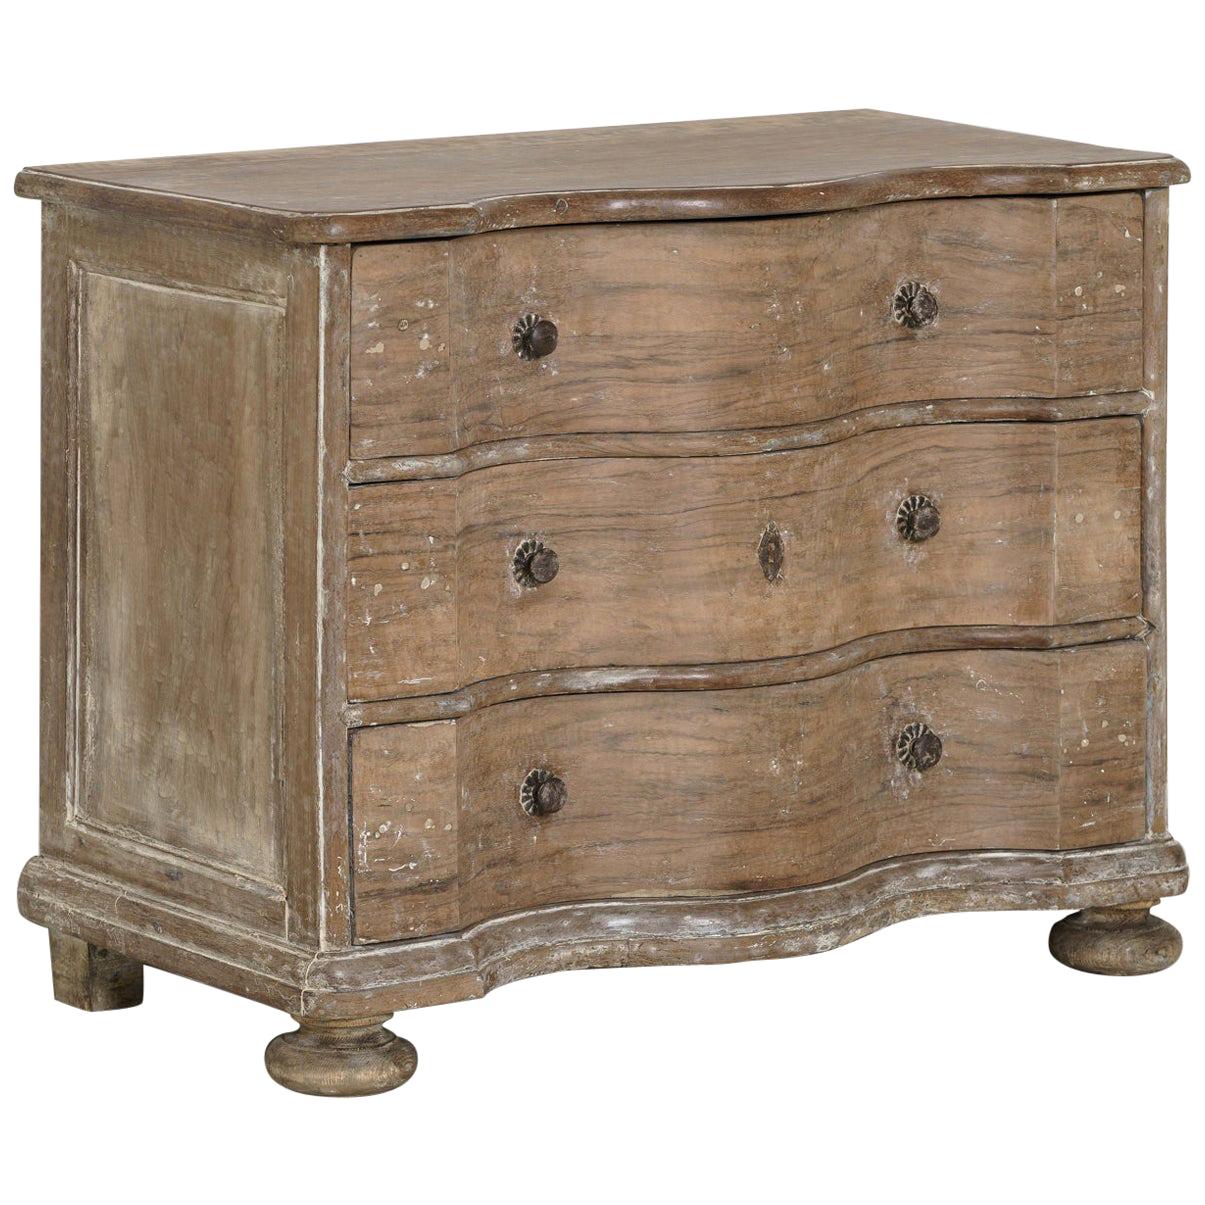 Walnut Commode with Serpentine Front and Original Patina